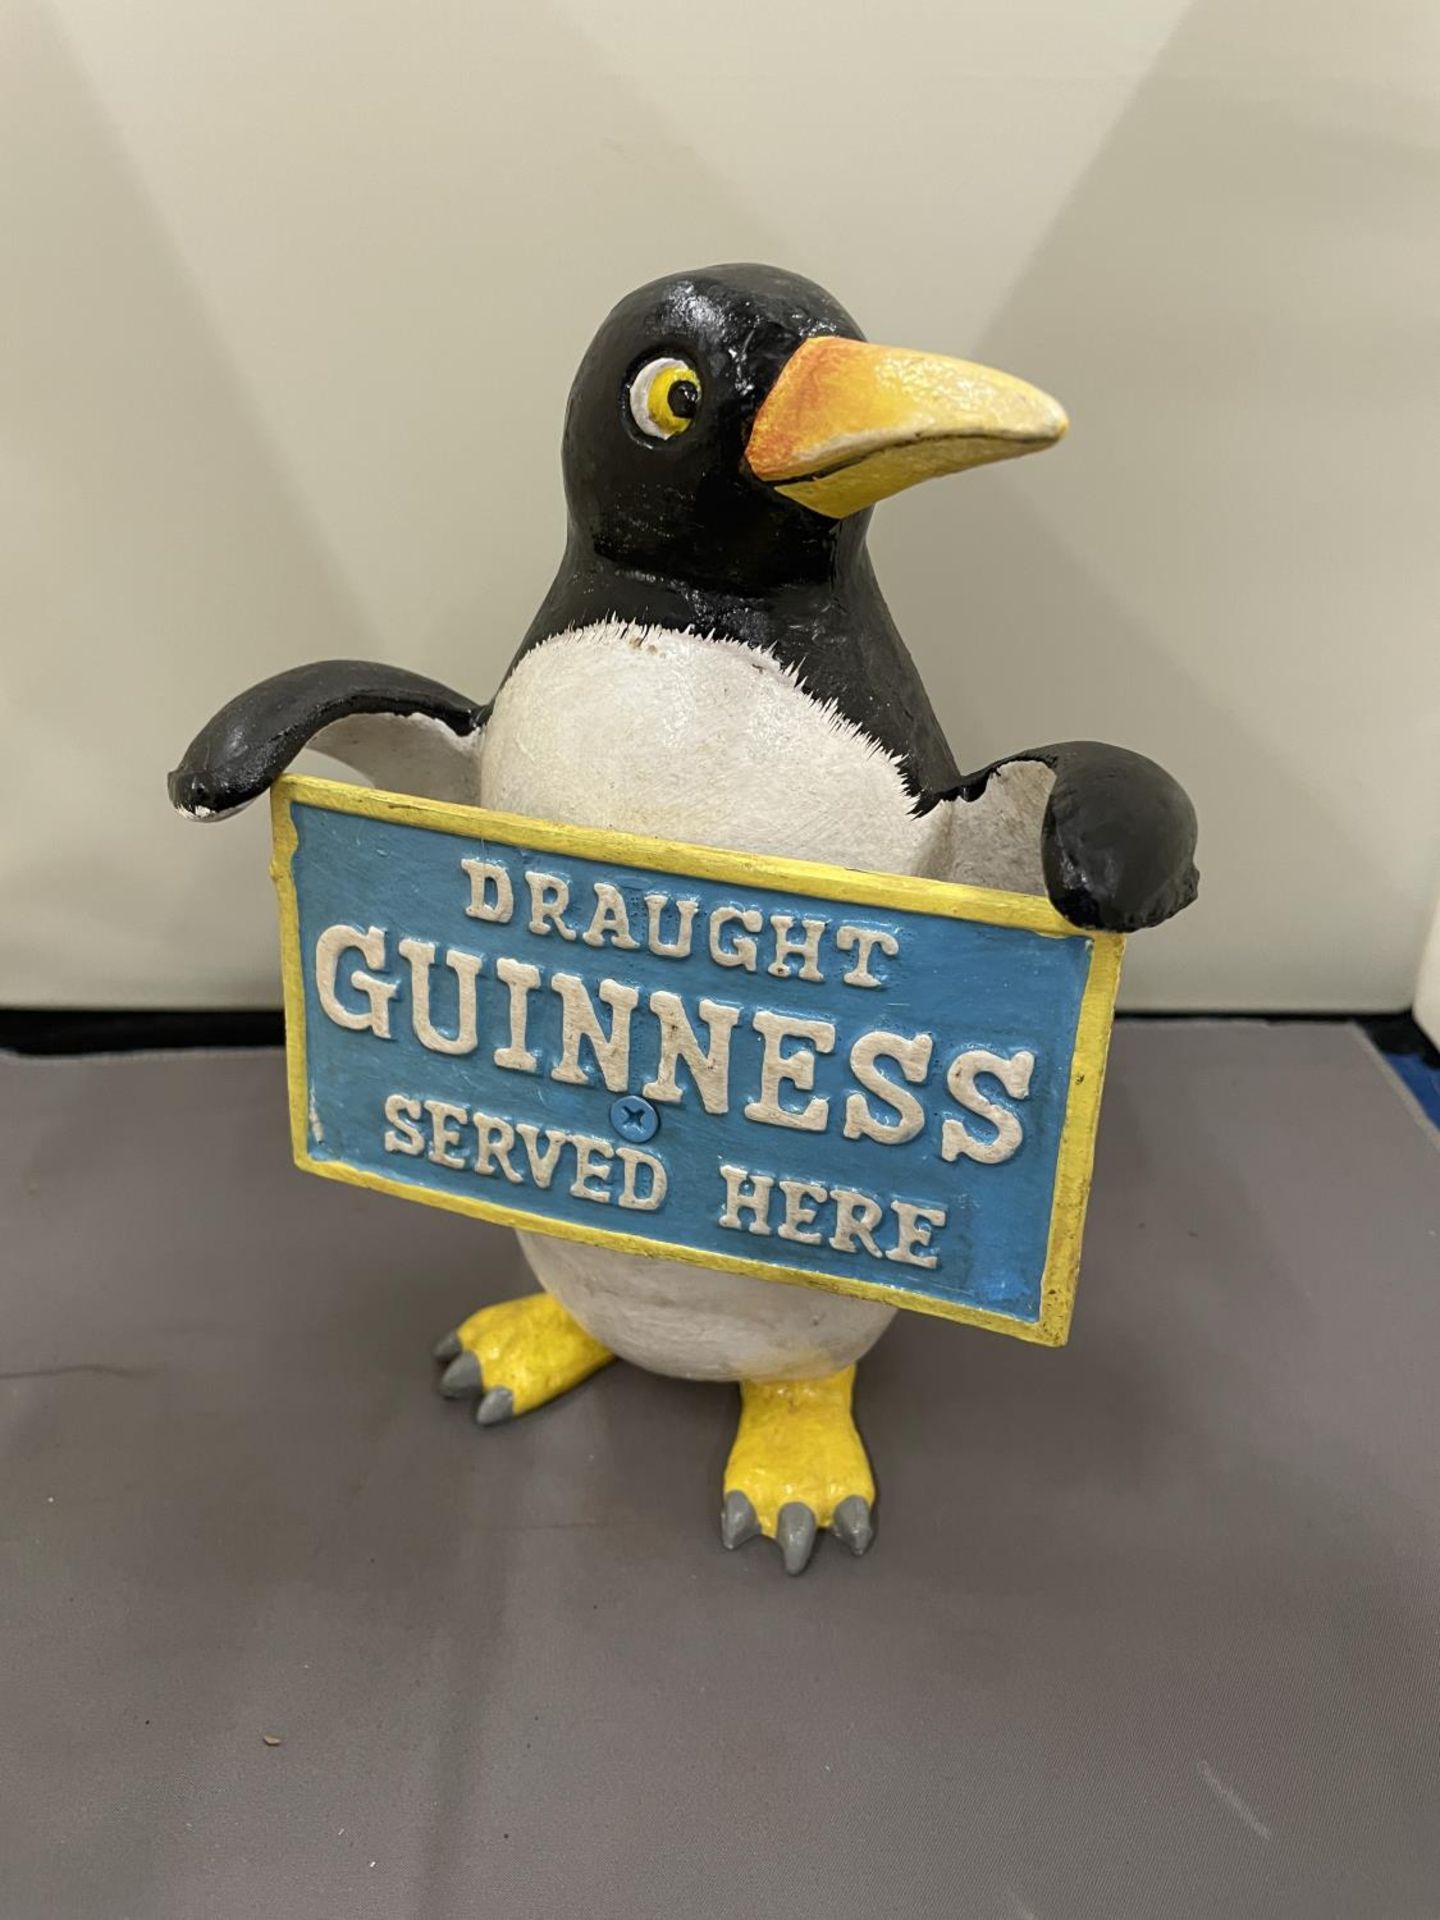 A GUINNESS ADVERTISING PENGUIN - Image 2 of 6